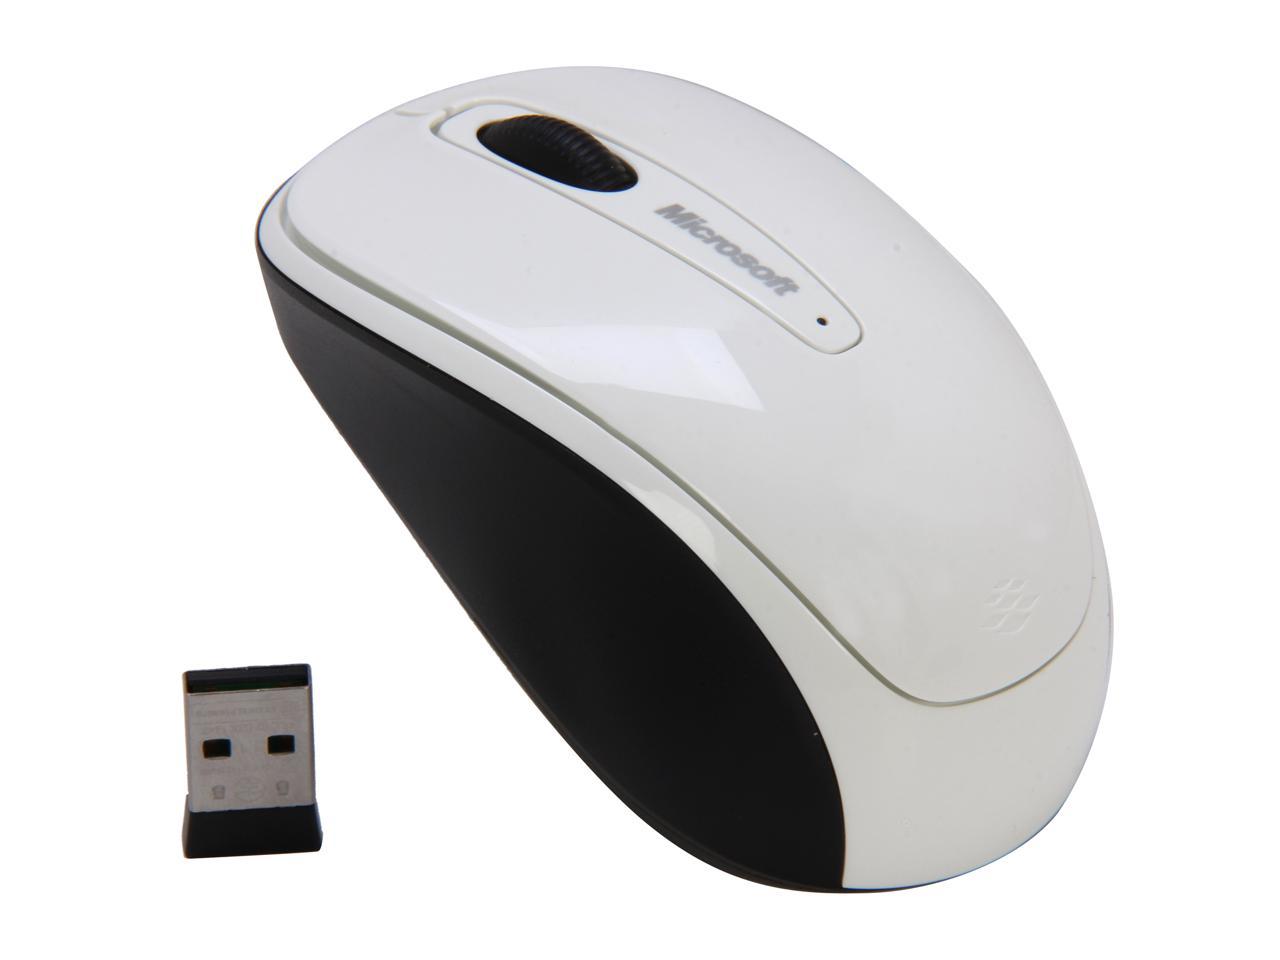 microsoft wireless mouse 1000 lost usb receiver